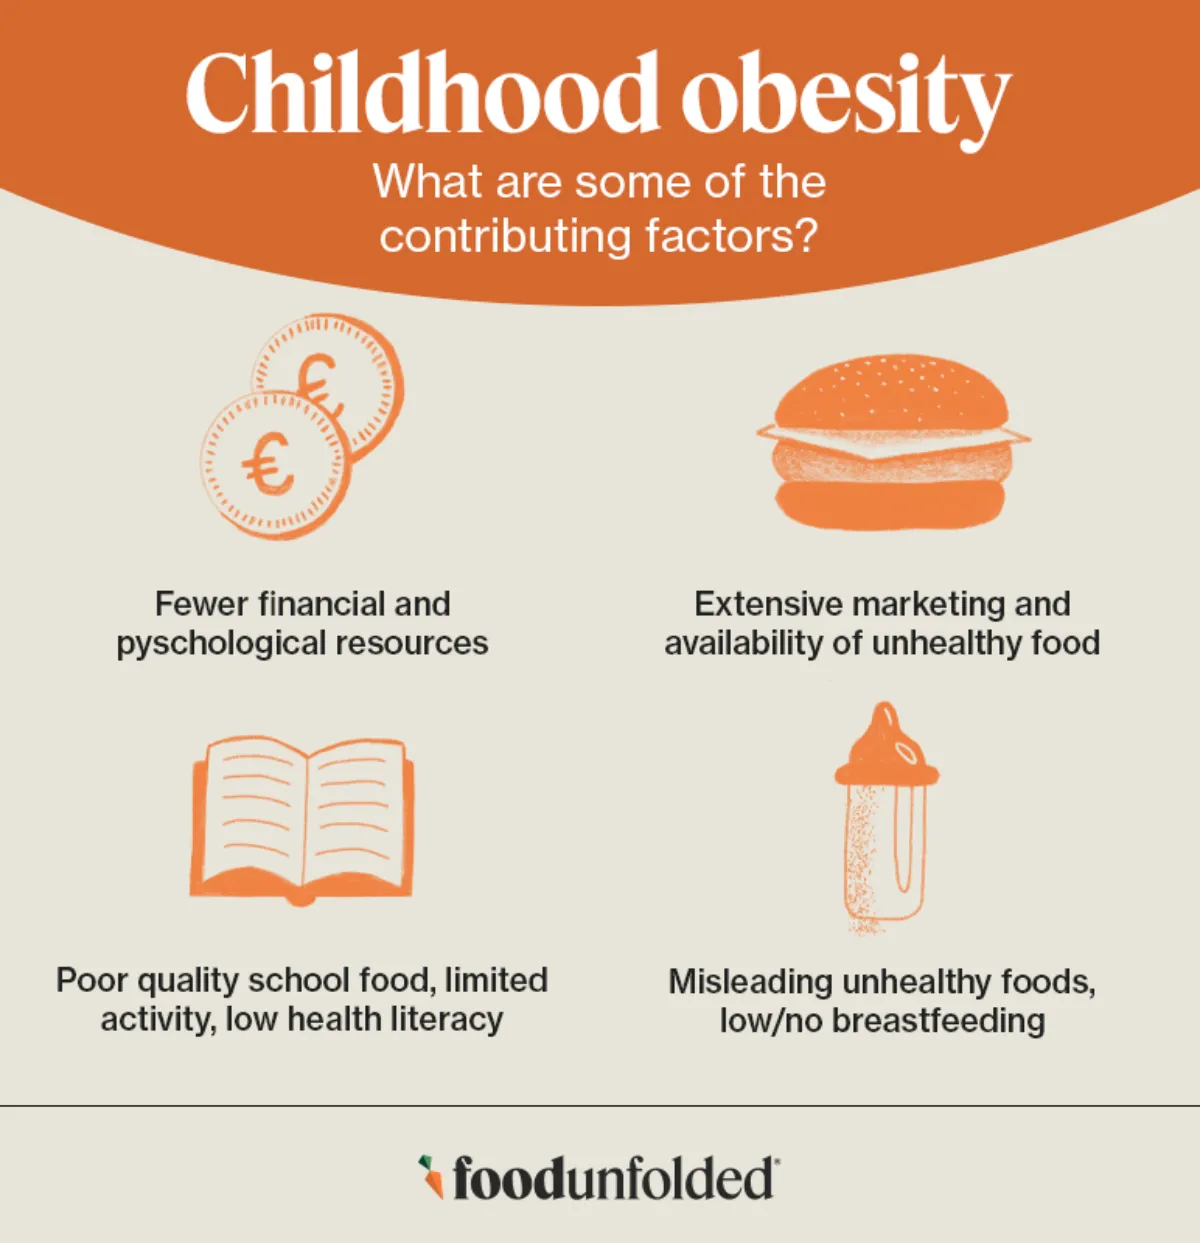 Childhood obesity goes hand in hand with a range of serious consequences for health and social life in childhood.